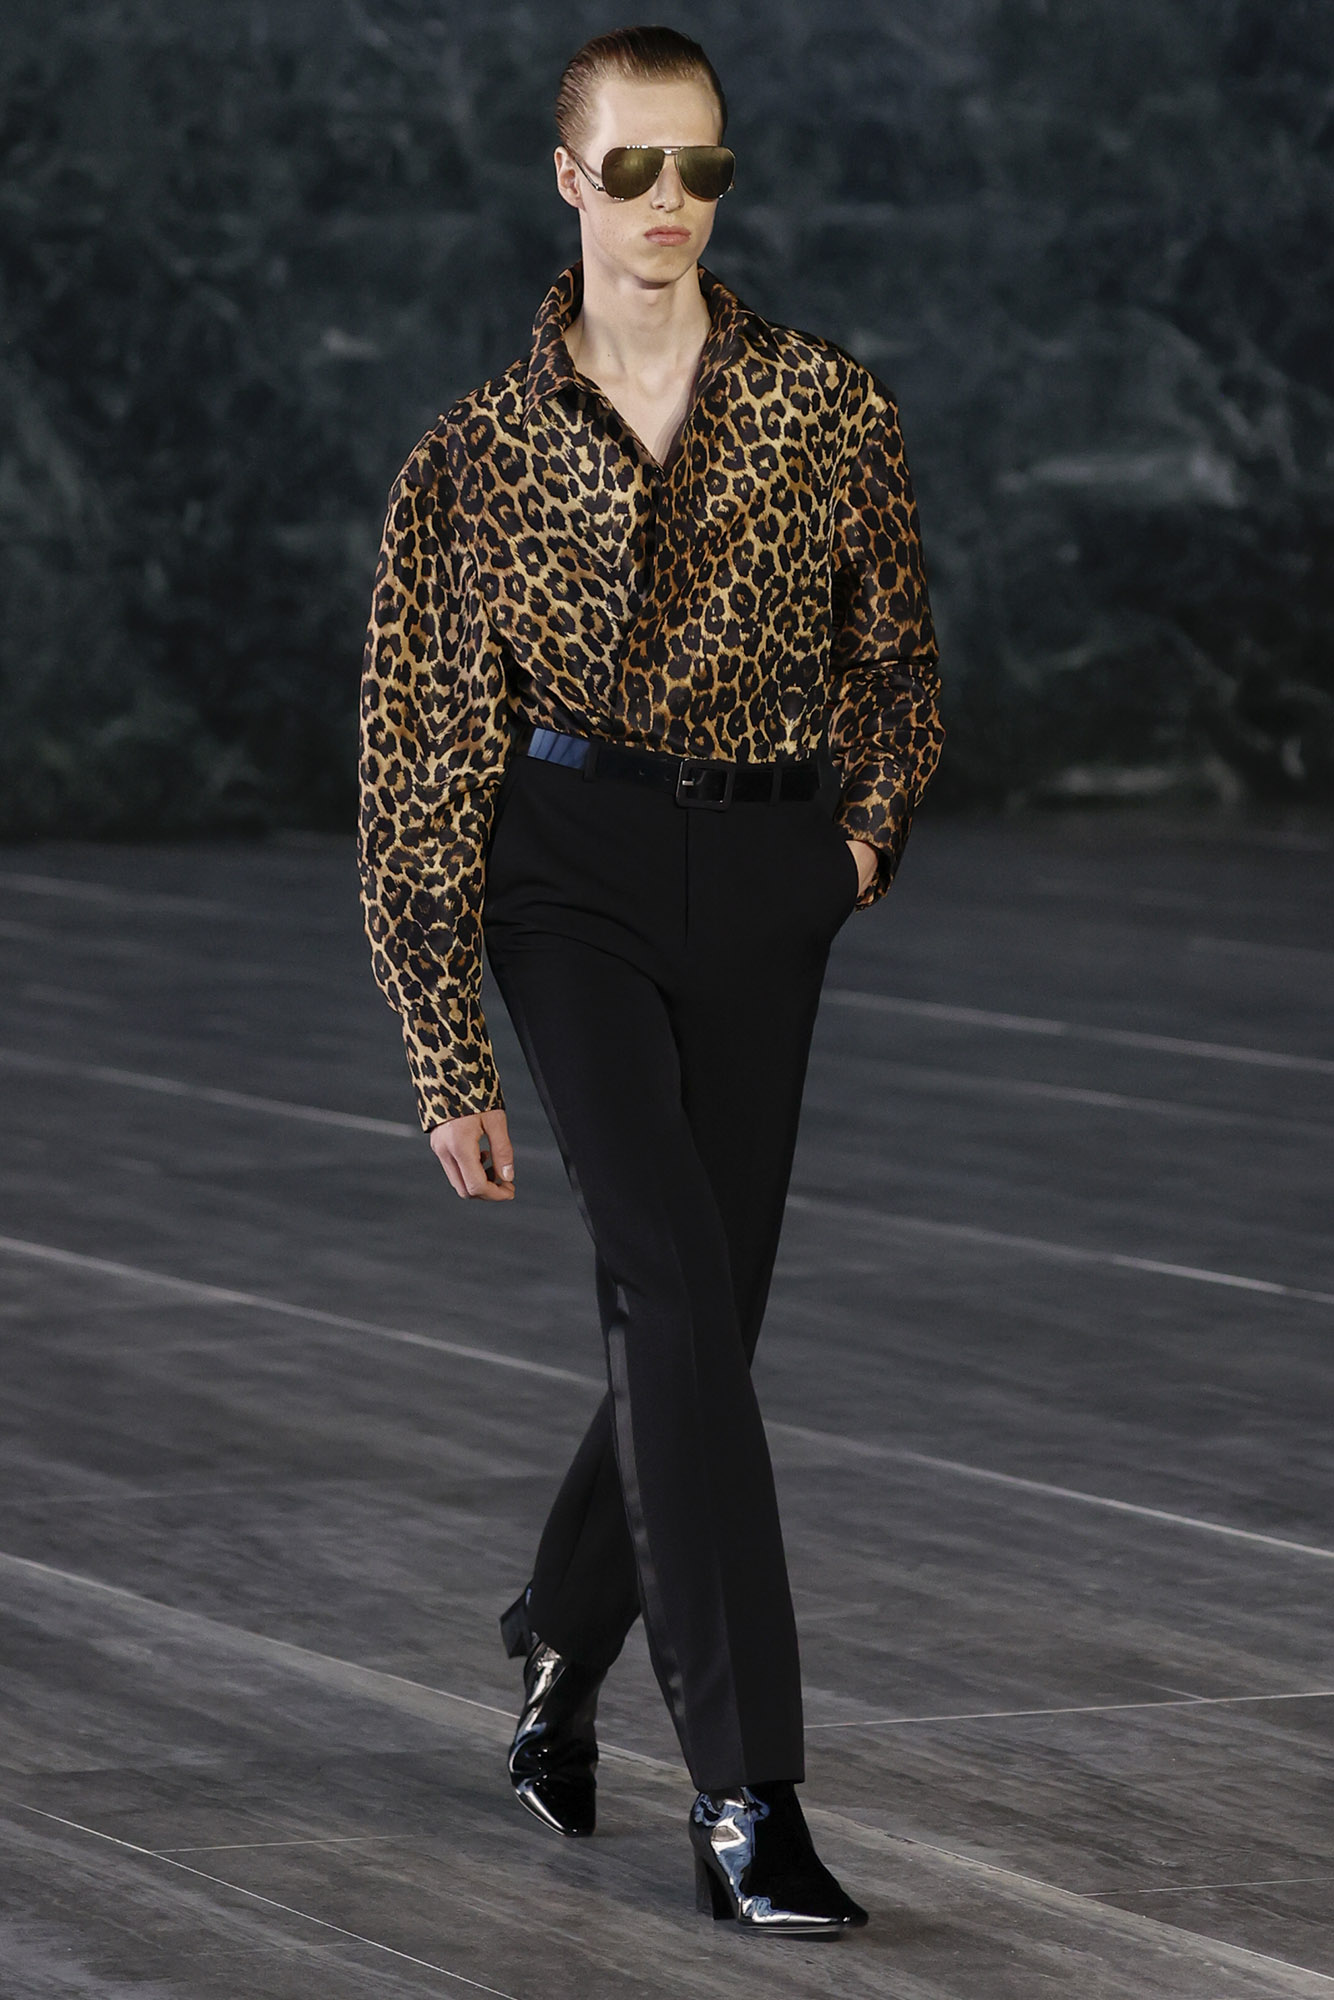 Saint Laurent Spring/Summer 2024 male model in leopard print shirt and sunglasses on runway